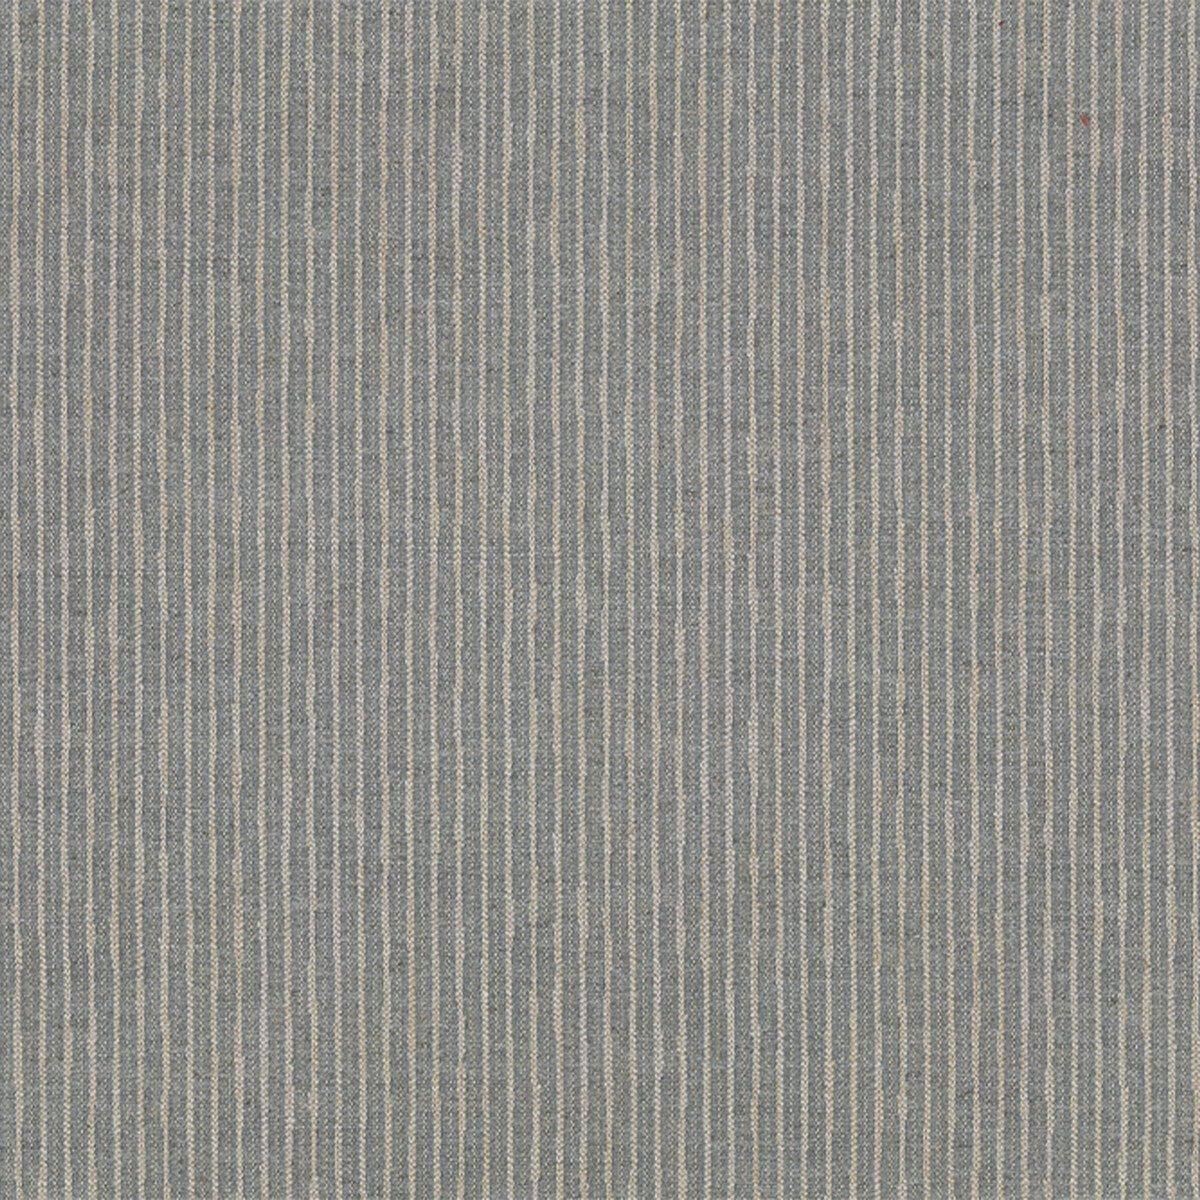 Bailey fabric in silver color - pattern BFC-3700.11.0 - by Lee Jofa in the Blithfield collection